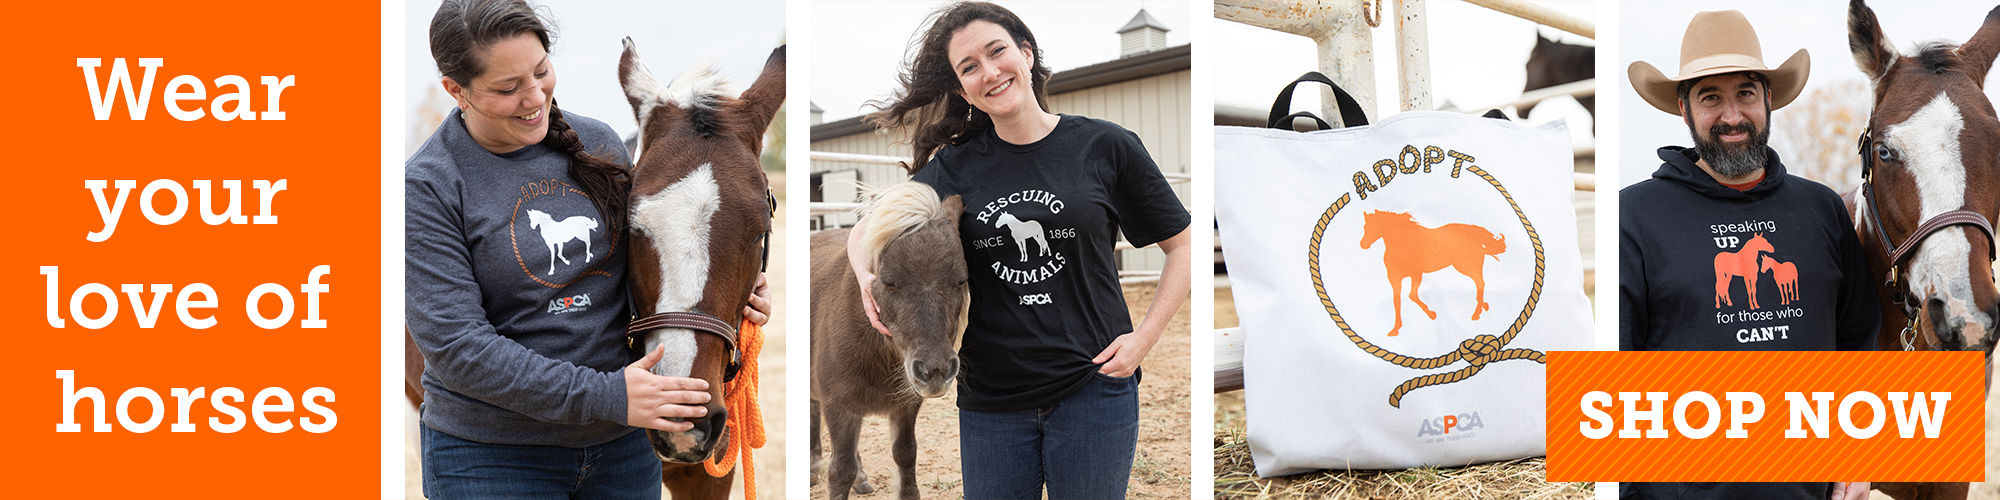 Horse themes shirts and tote bags